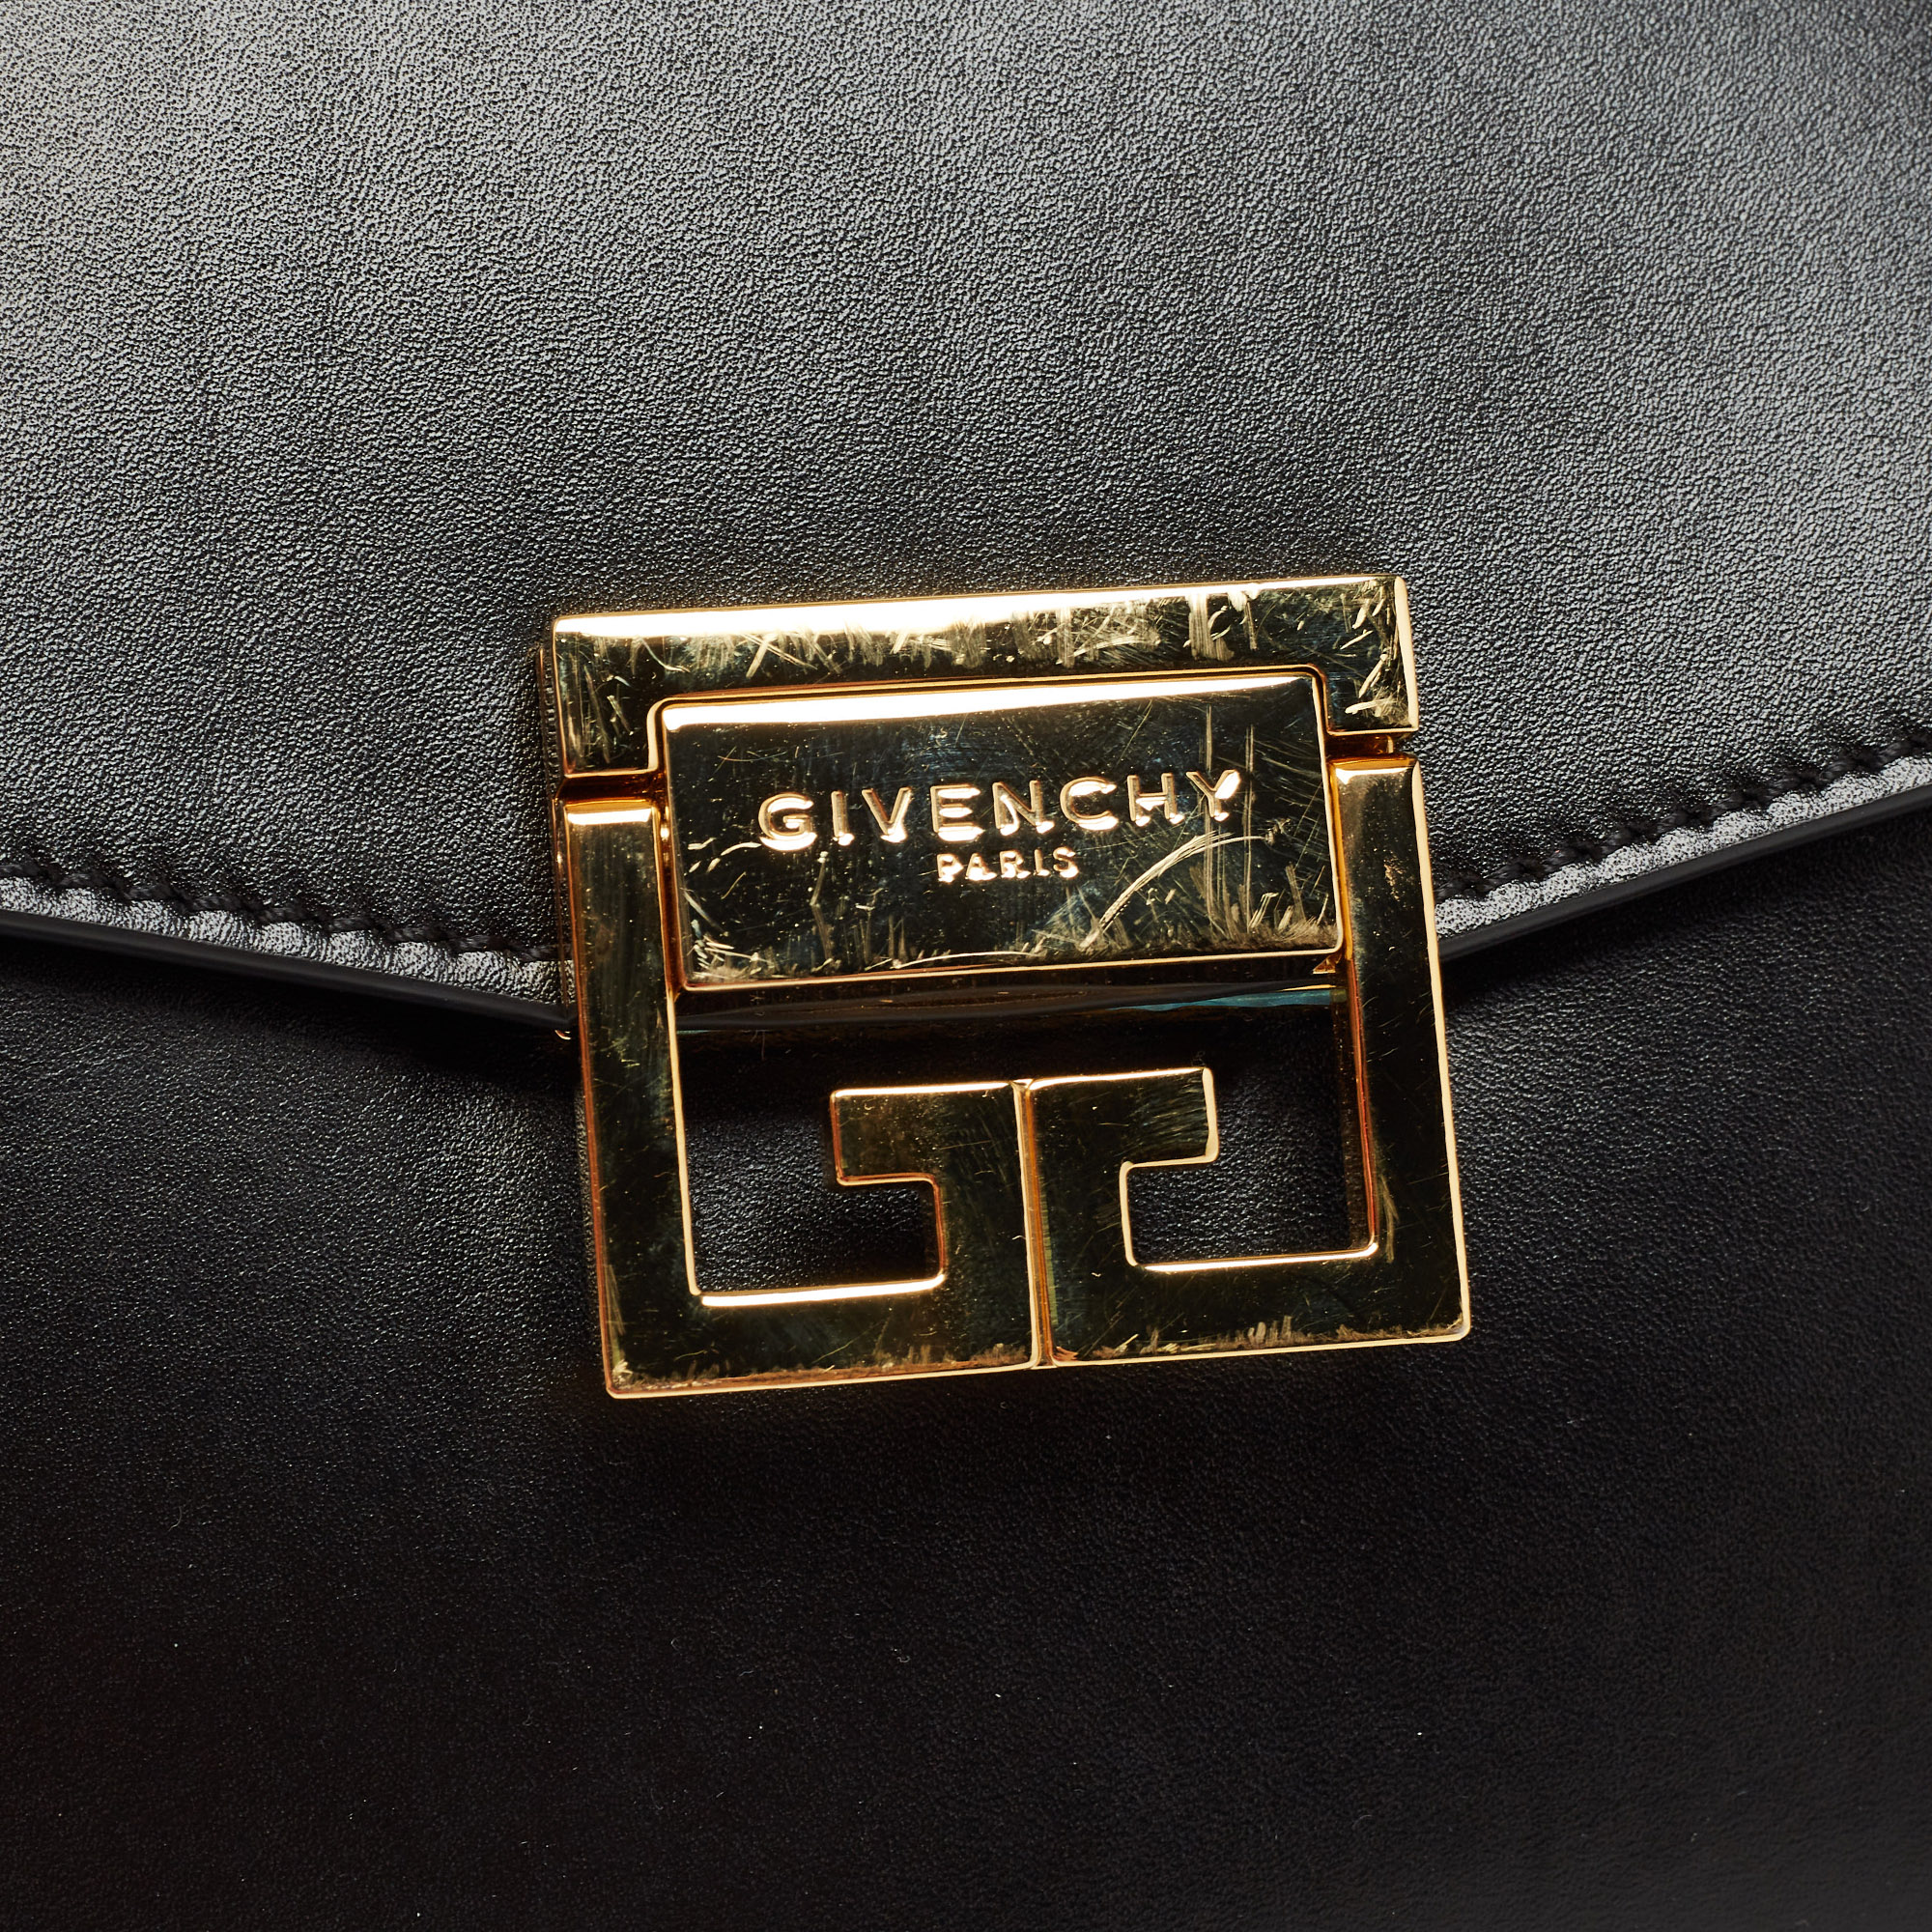 Givenchy Black Glossy Leather Small GV3 Shoulder Bag